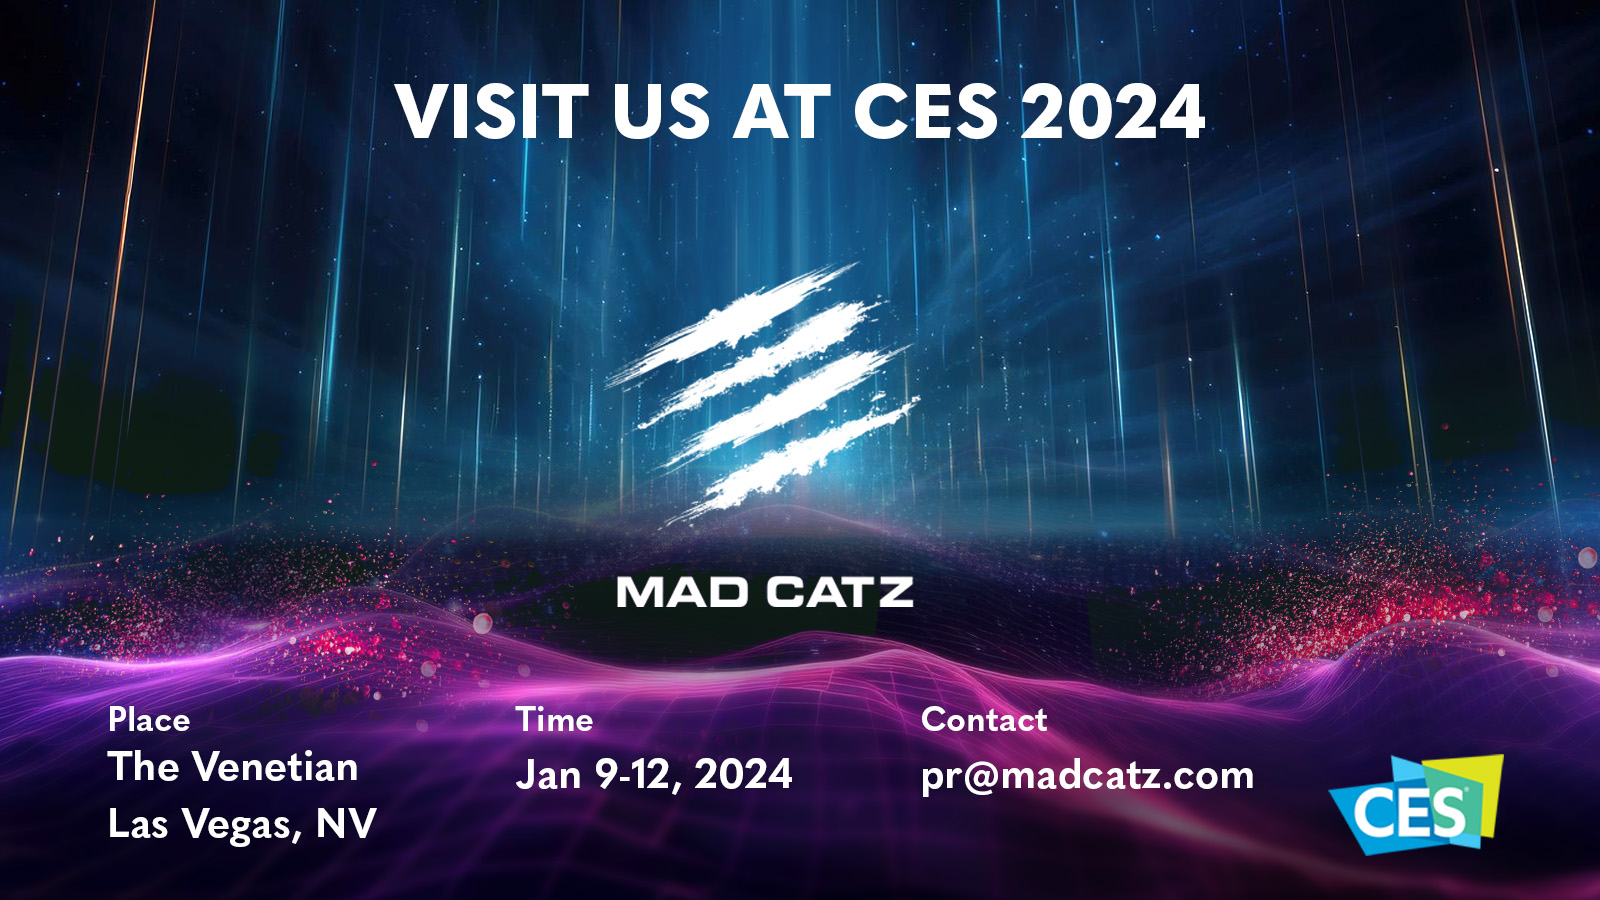 Join Mad Catz at CES 2024 for the Unveiling of Innovative Gaming Peripherals and the Much-Anticipated Return of a Gaming Legend